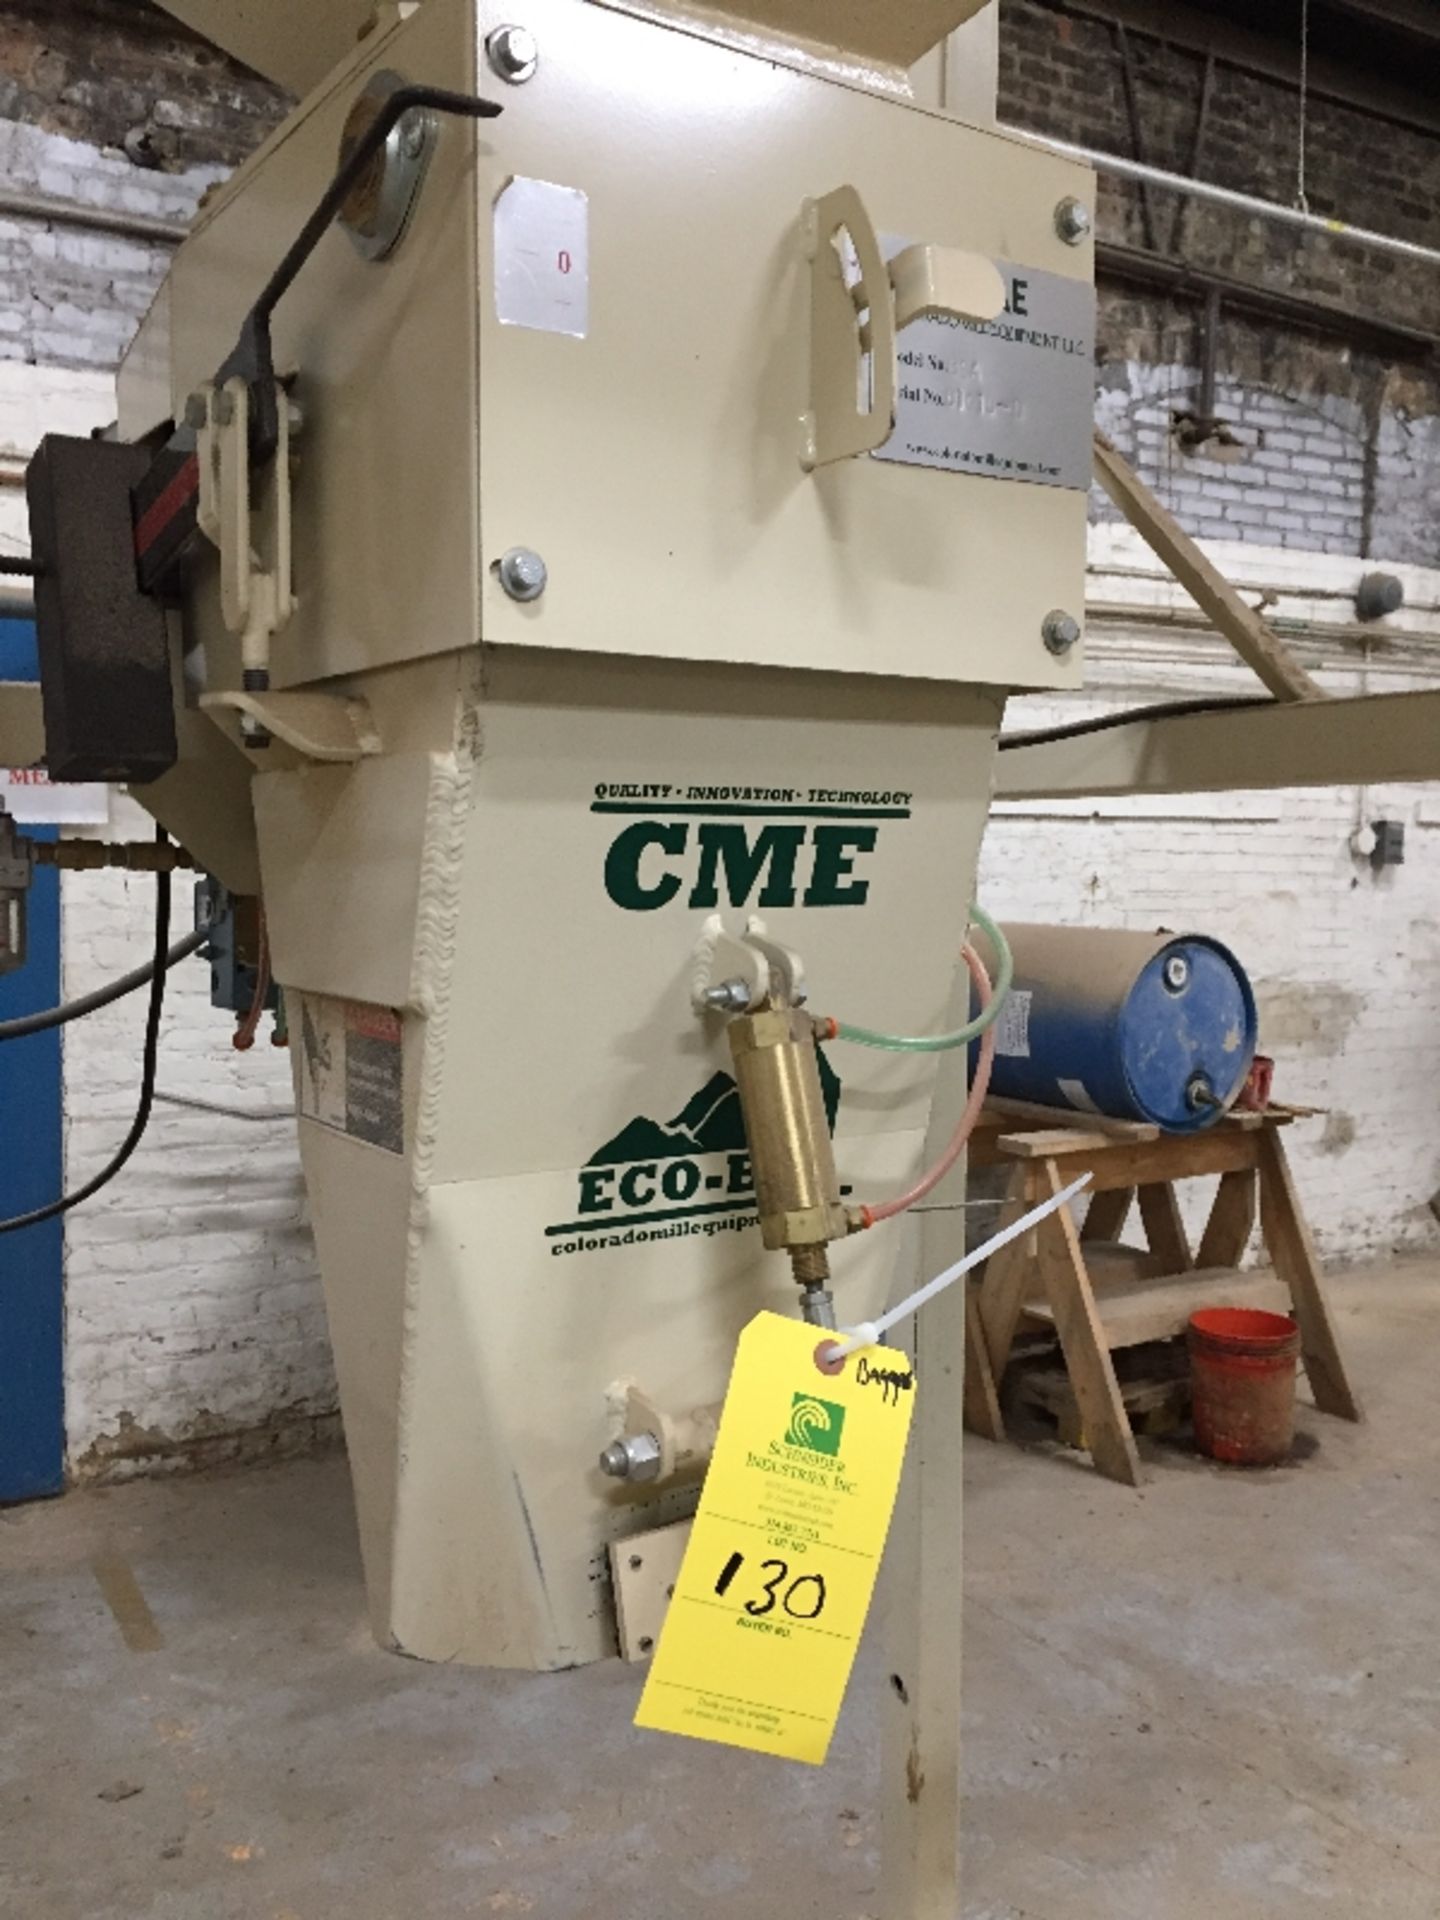 CME Bagger ECO-B5A 15 to 125lbs, (S/N 61015-D) NEW 2014. __$TBD__rigging and loading fee to be added